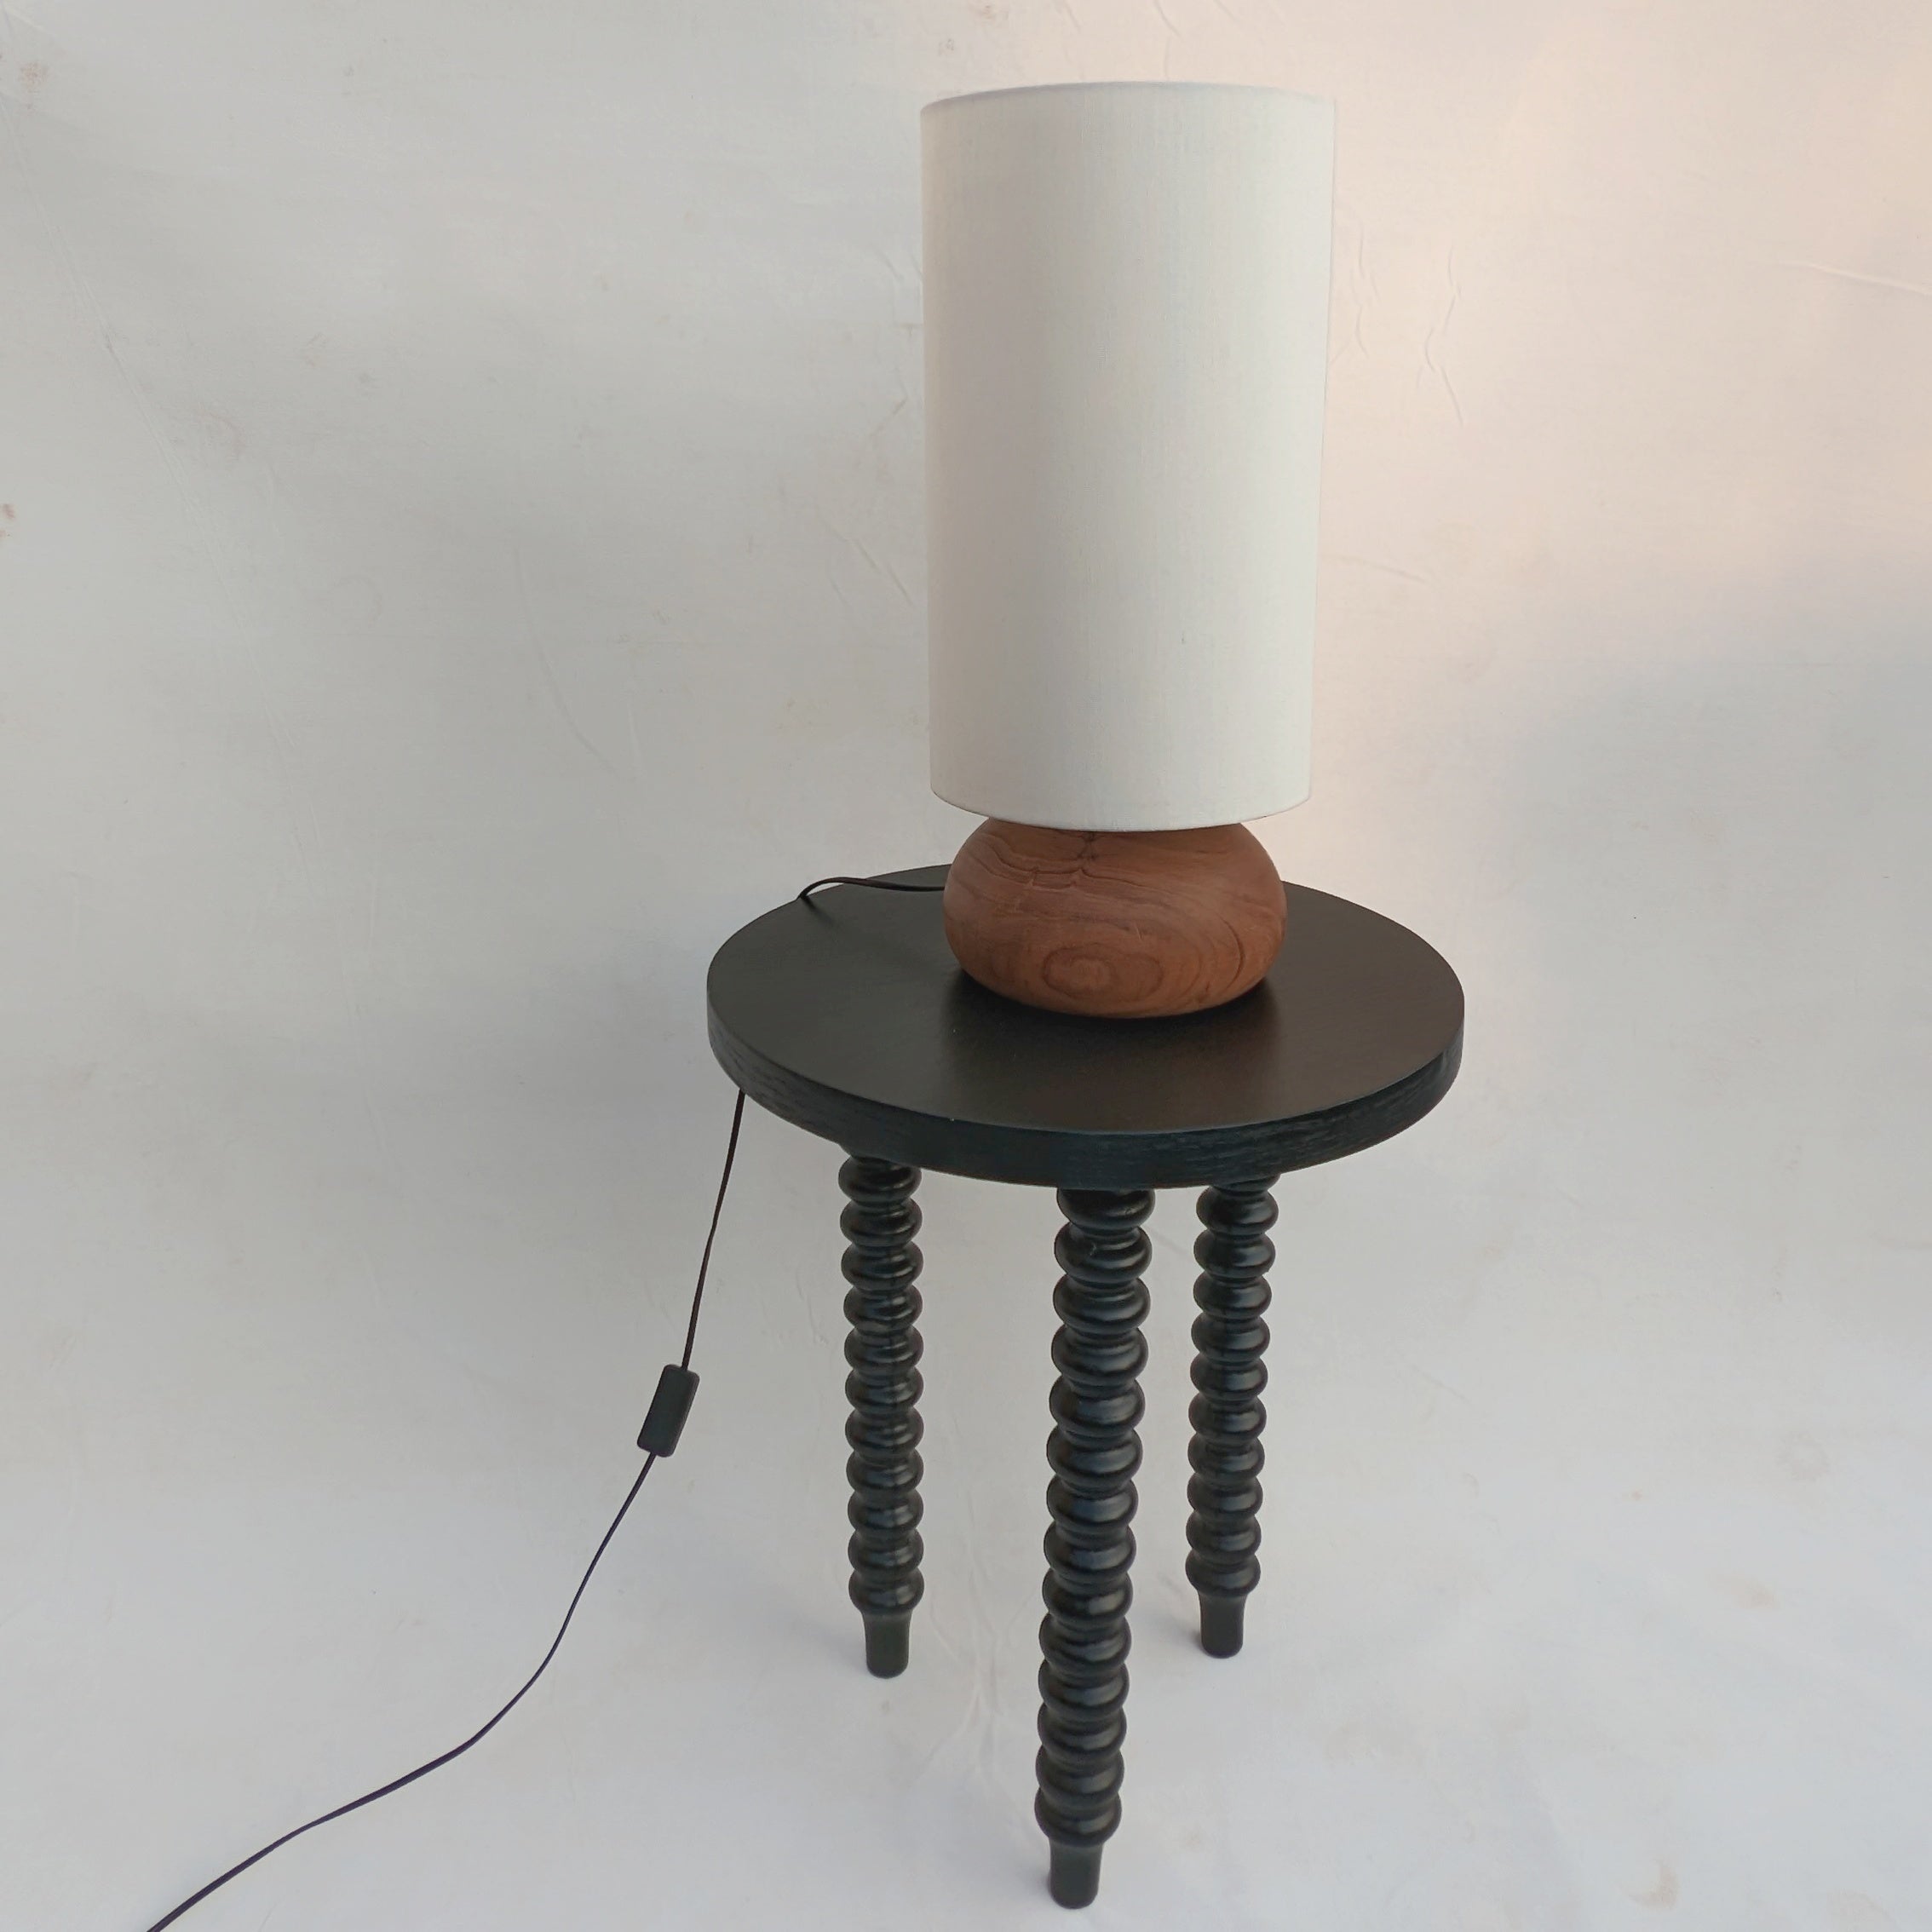 THE DOME LAMP - Keel